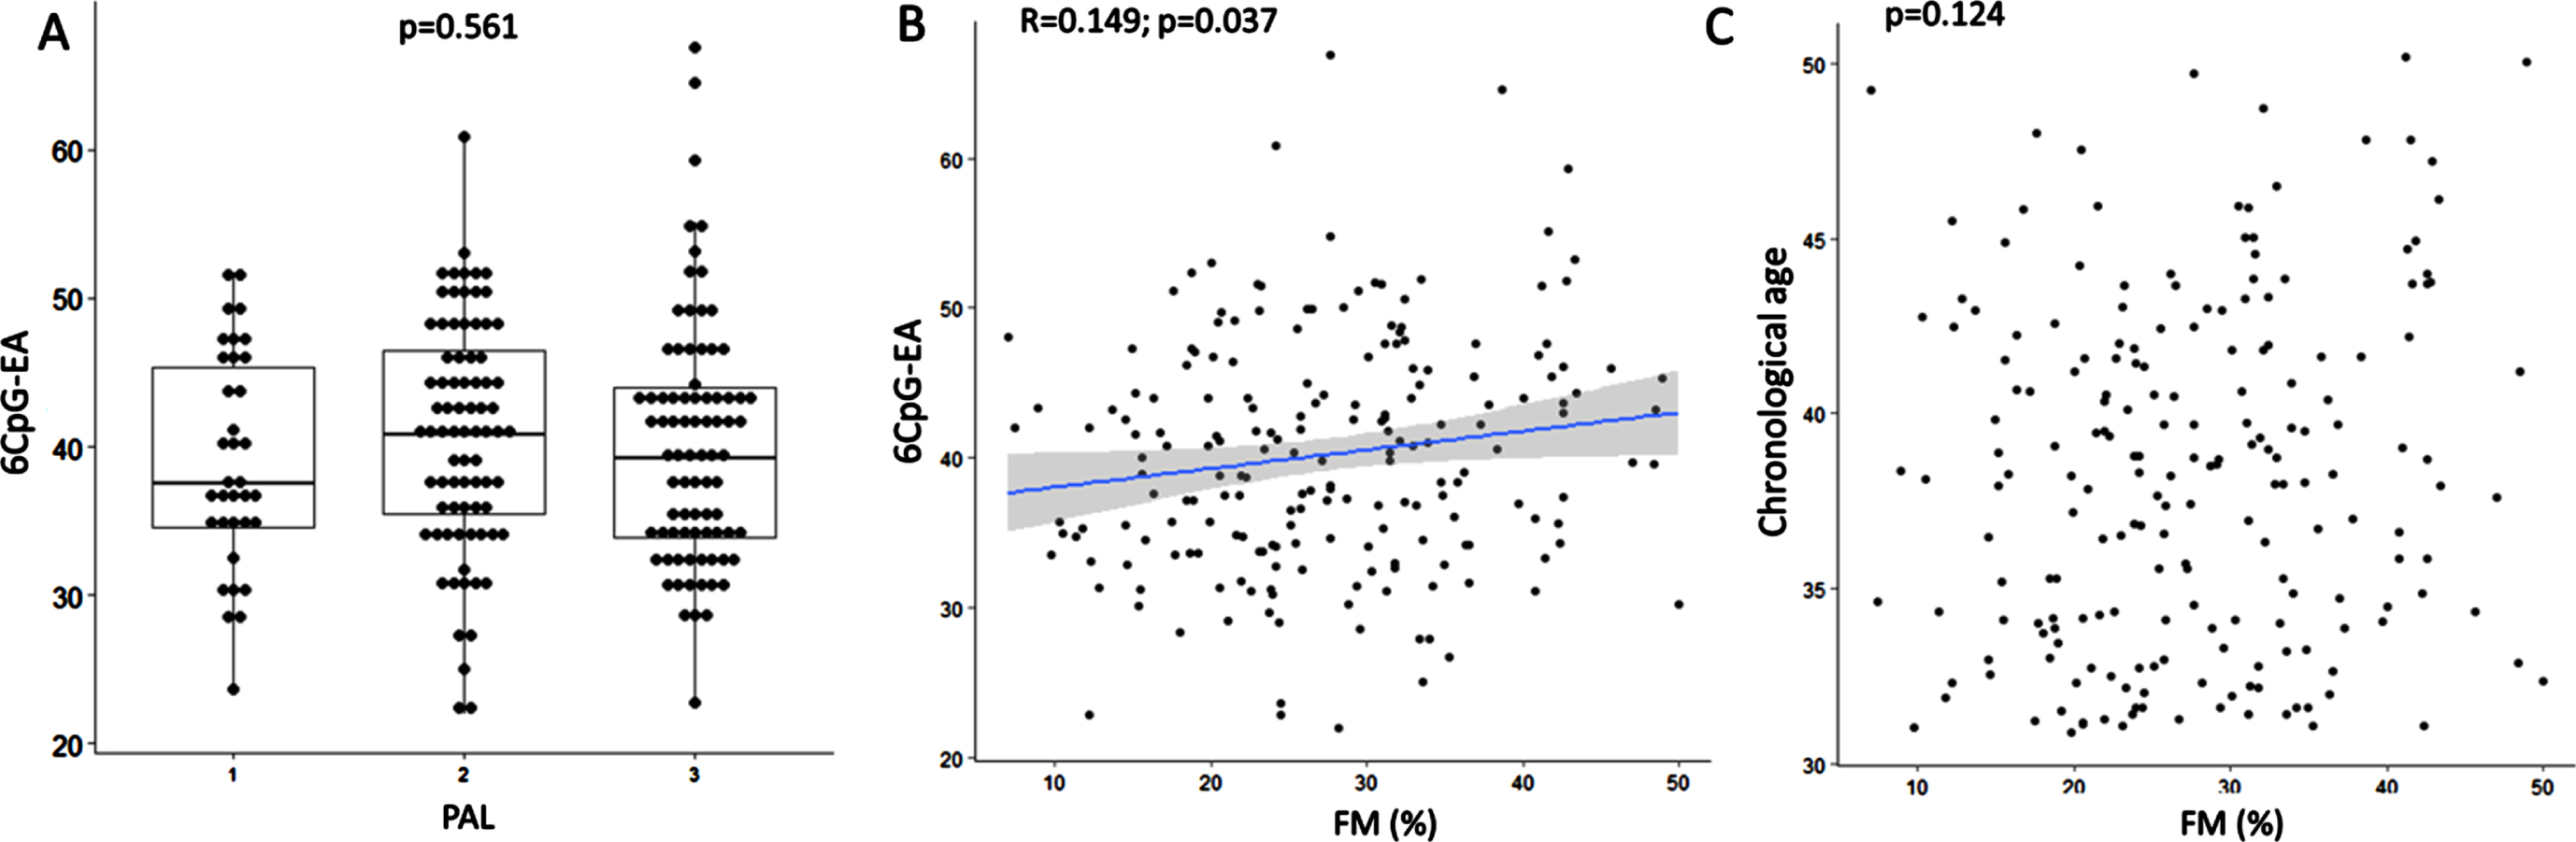 Boxplots show 6CpG-EA differences among individuals with different physical activity levels (A). Correlation between FM% and 6CpG-EA (B) and chronological age (C) are shown. FM: fat mass; PAL: physical activity level (1 = low; 2 = medium; 3 = high) measured by the International Physical Activity Questionnaire (IPAQ).